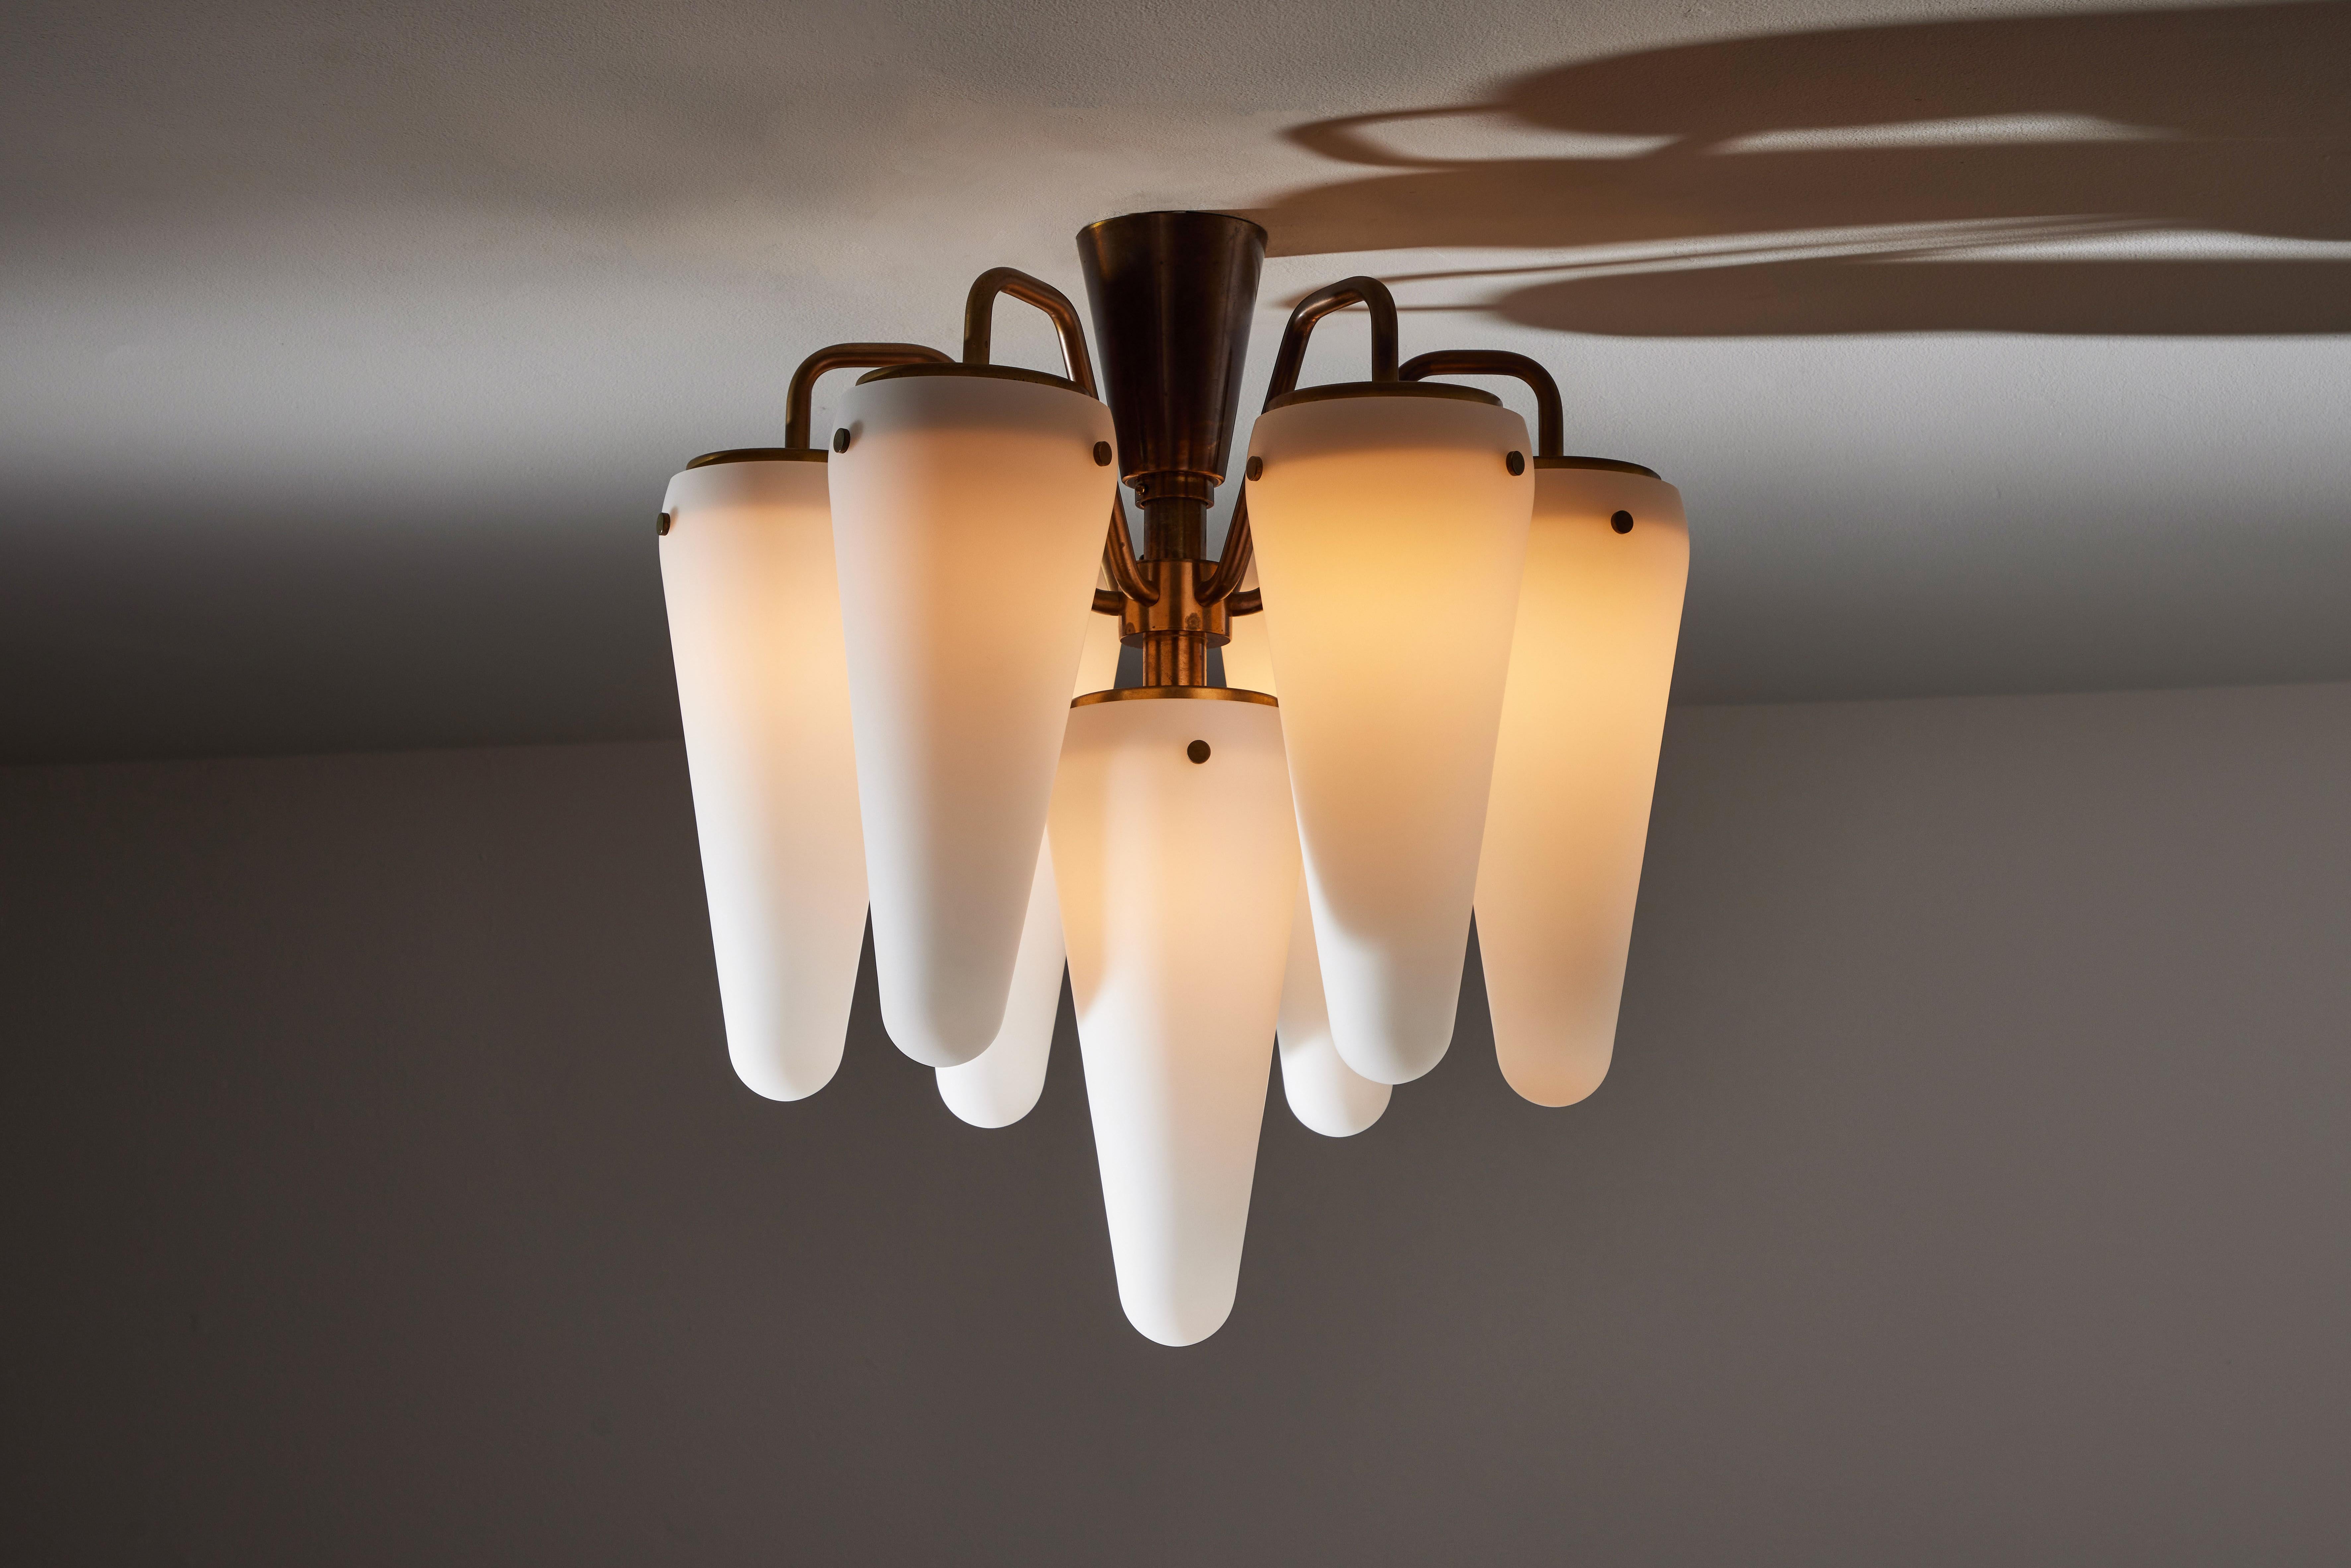 Two flushmount chandeliers by Hans-Agne Jakobsson. Manufactured in Sweden, circa 1960s. Brushed satin glass diffusers, brass armature. Wired for U.S. standards. We recommend seven E27 15w maximum bulbs per fixture. Bulbs provided as a one time